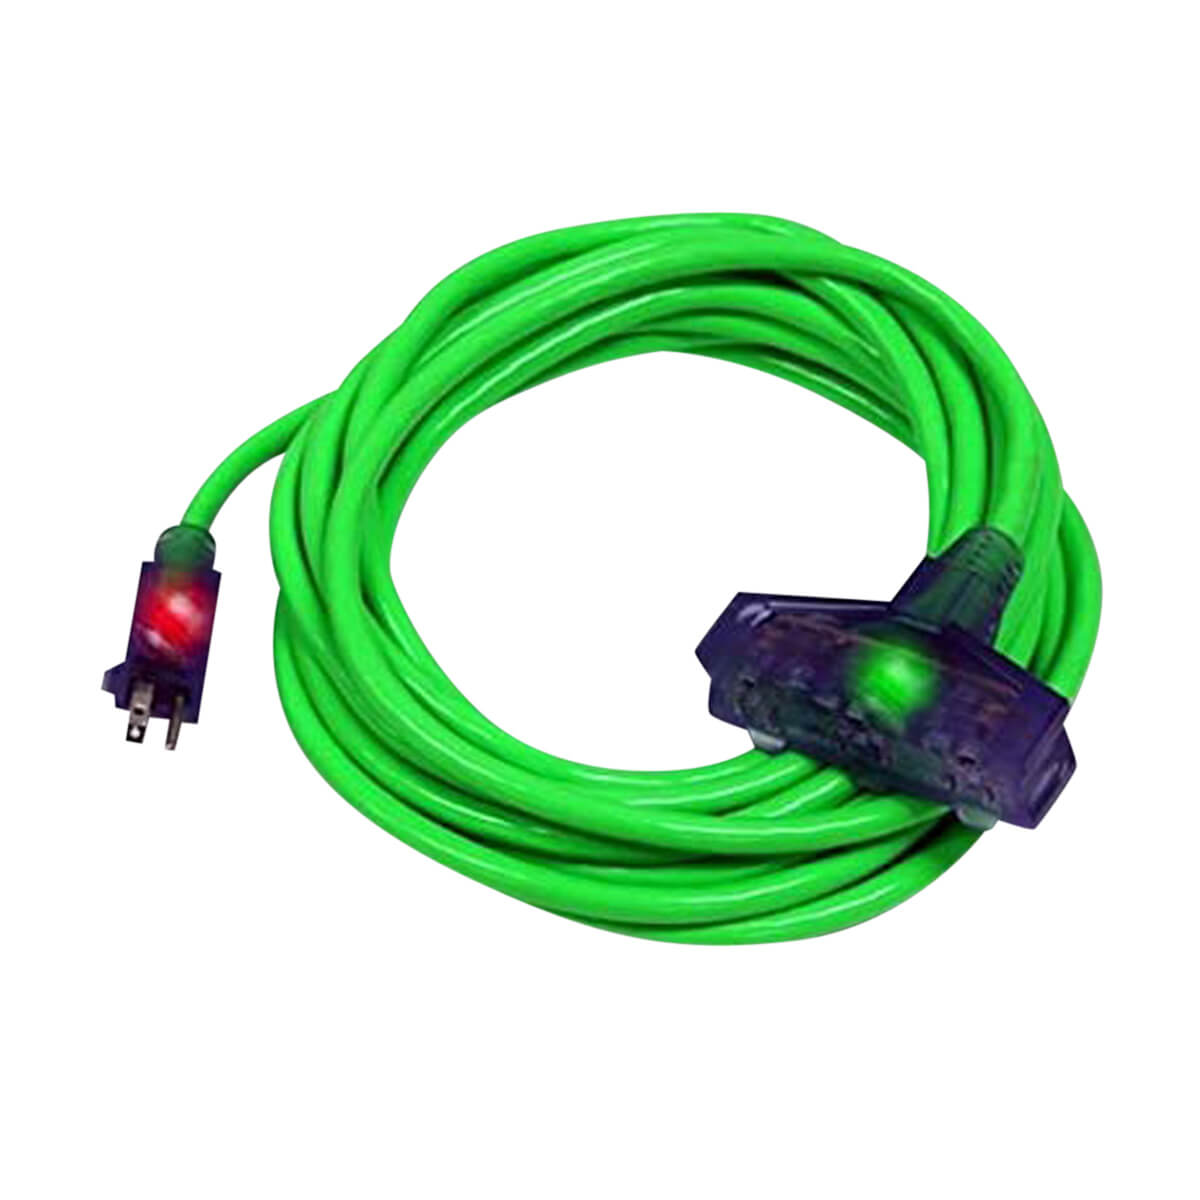 Pro Glo® Extension Cord 100-ft - Green